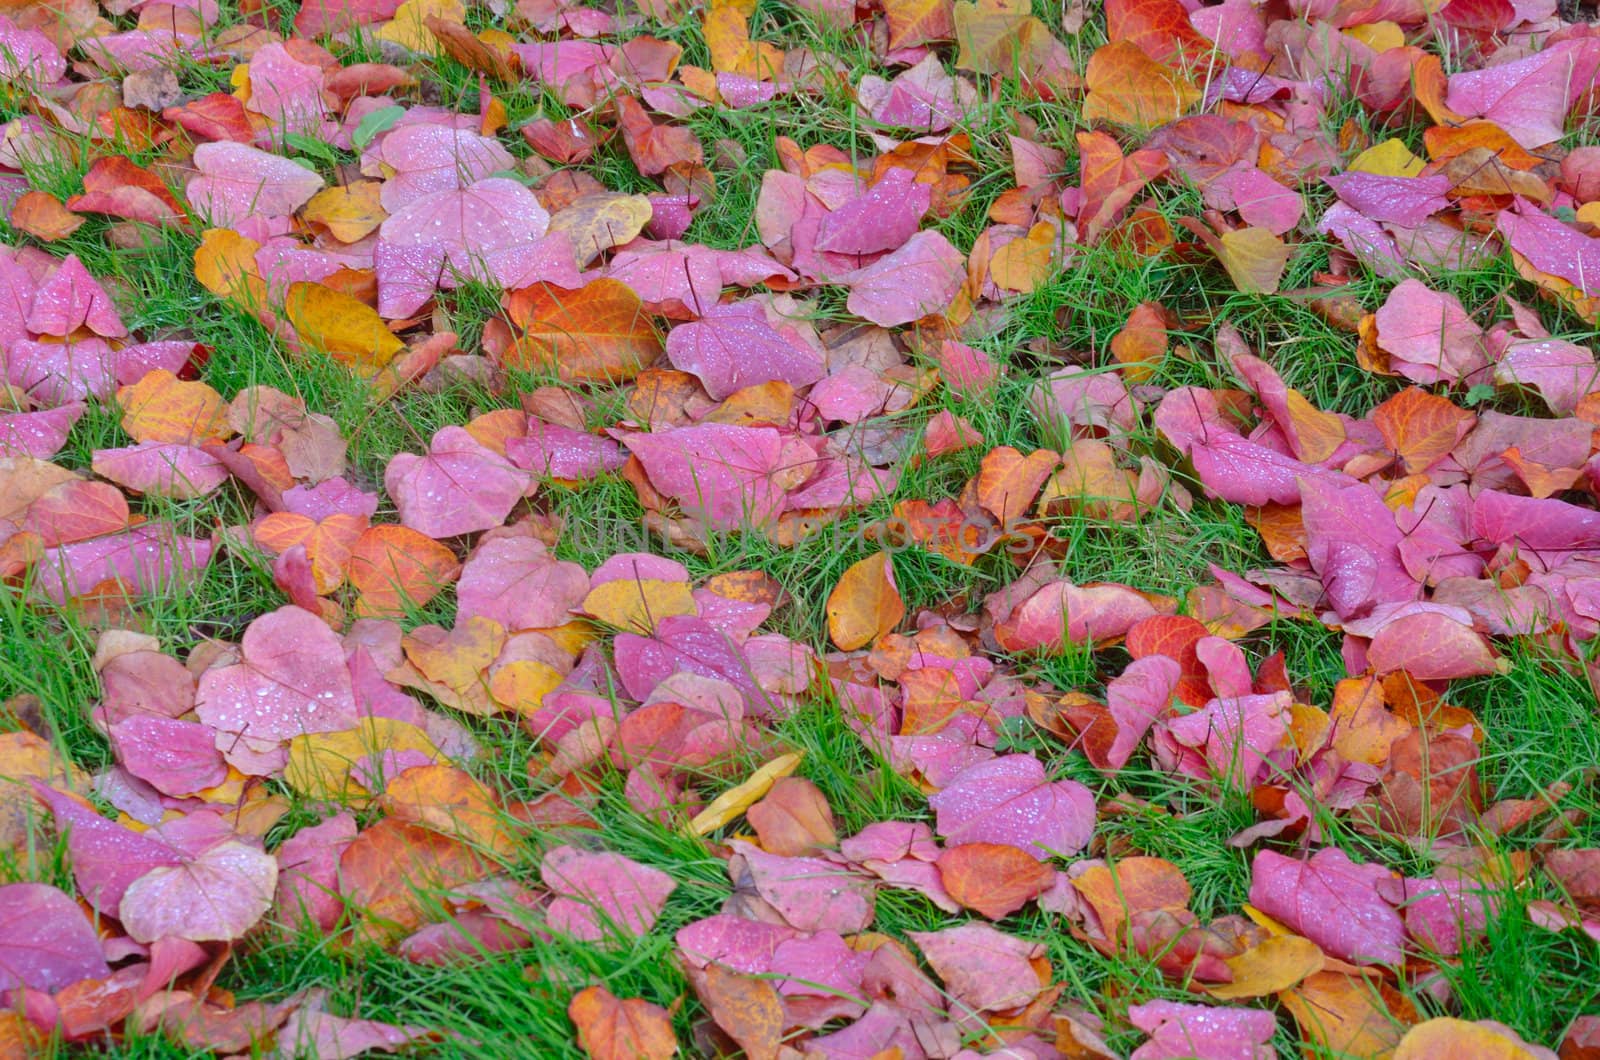 autumn leaves on ground by pauws99